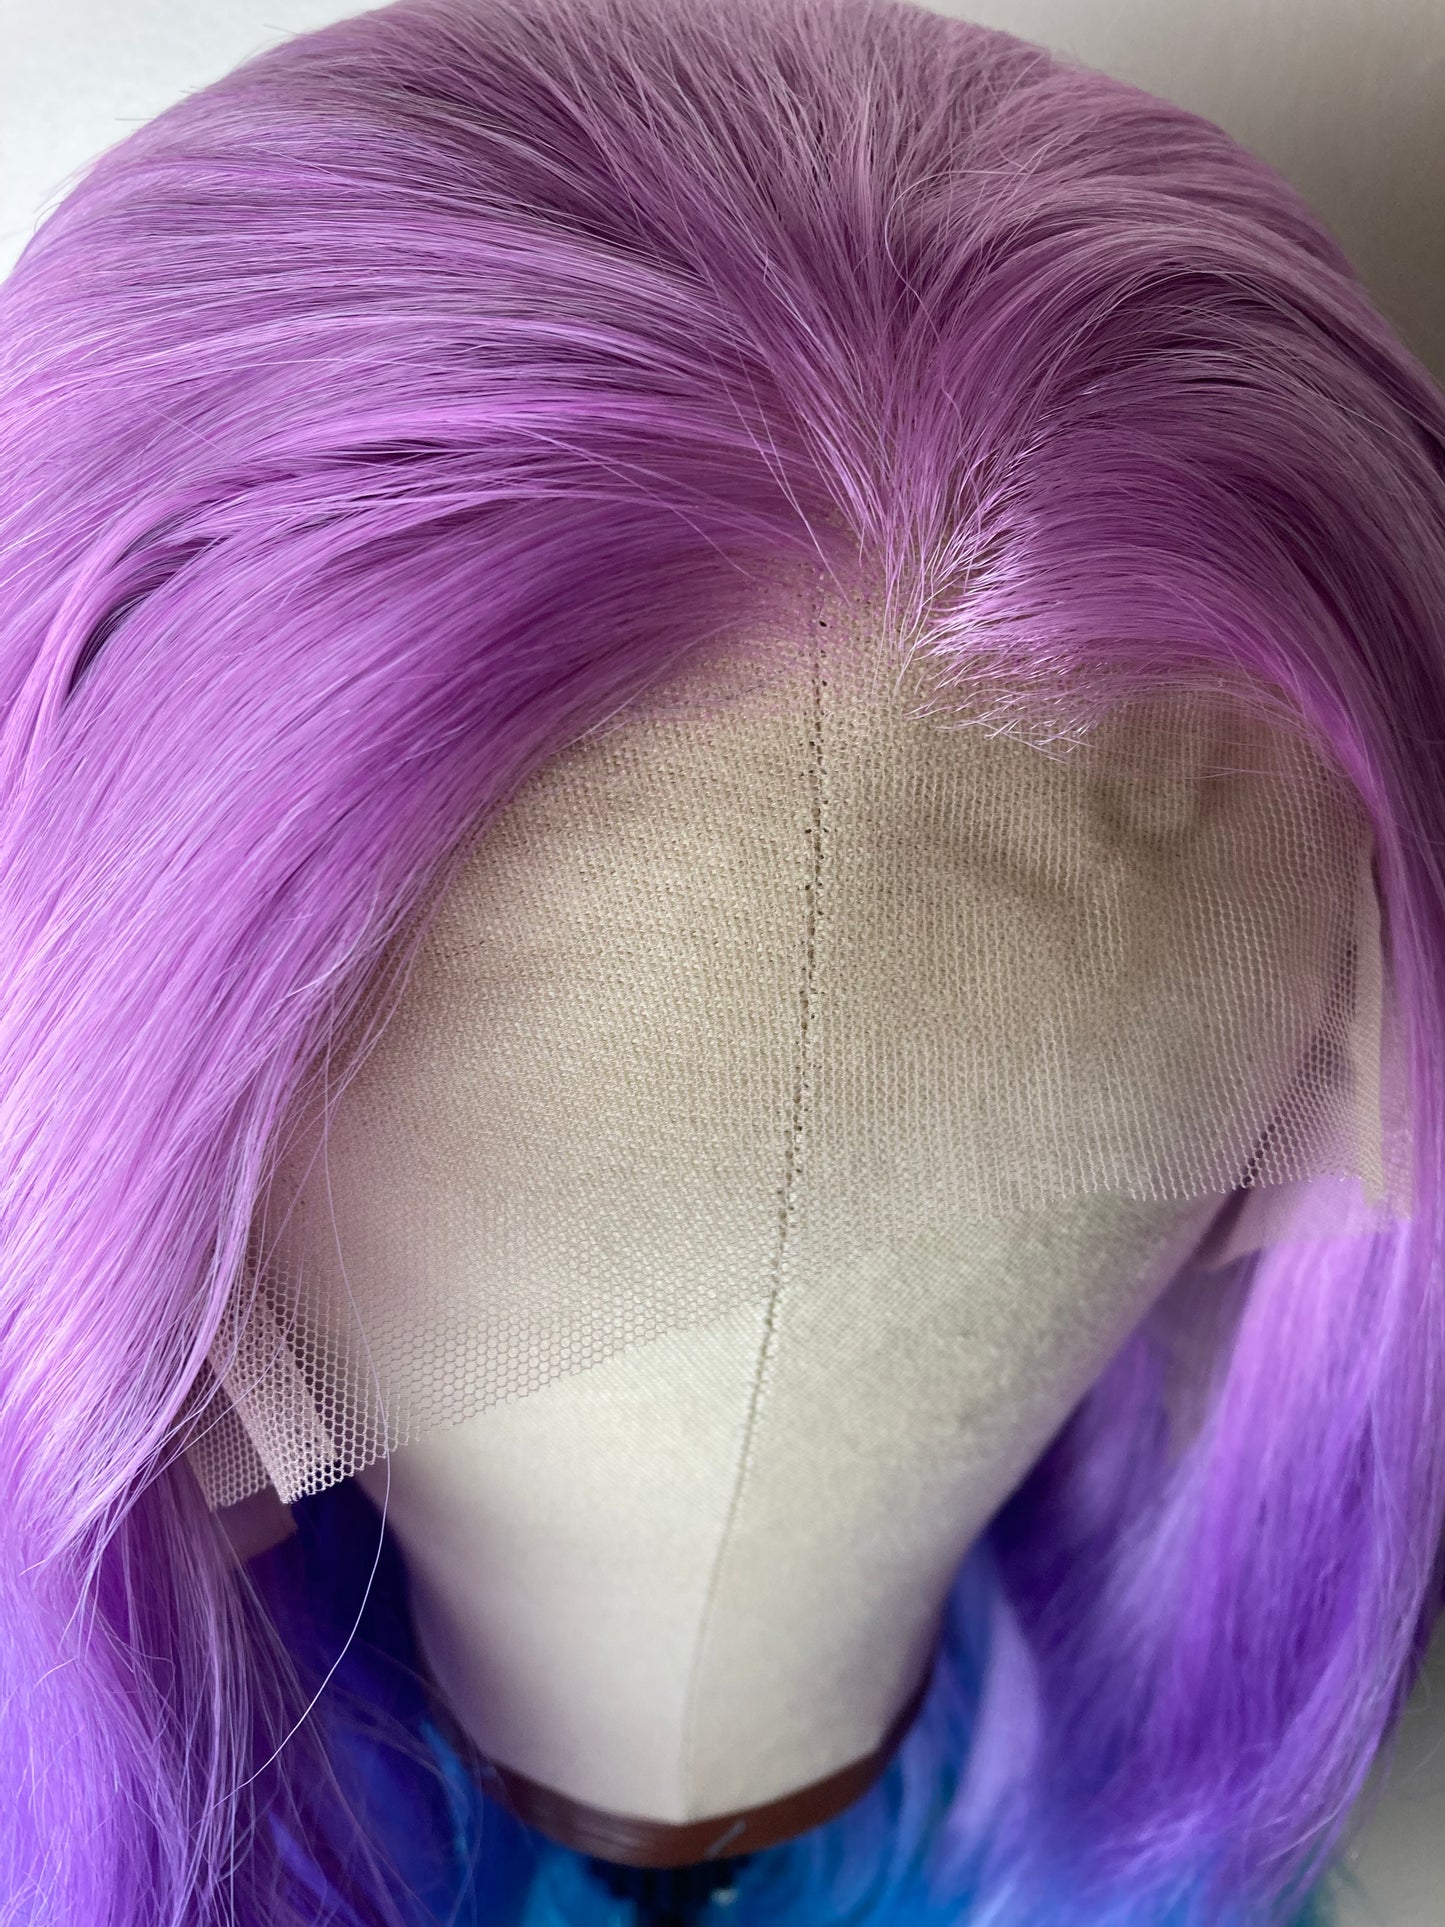  Ombre Purple Blue Wig Synthetic Lace Front Wig Natural Wavy Wig Multicolor Cosplay Wigs For Women